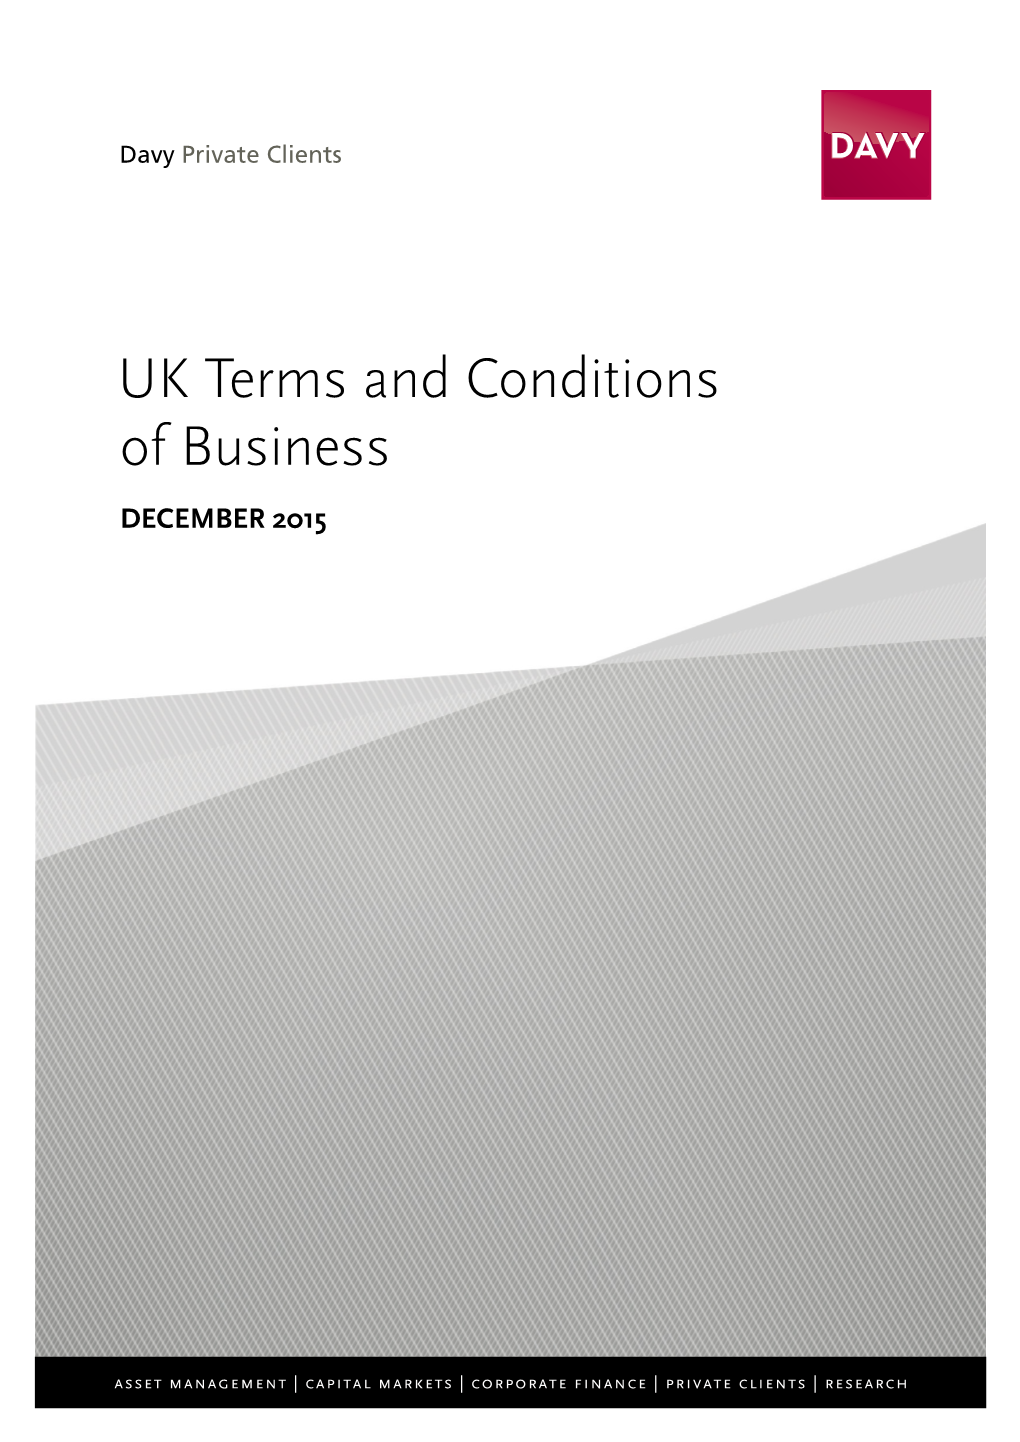 UK Terms and Conditions of Business DECEMBER 2015 Welcome to Davy